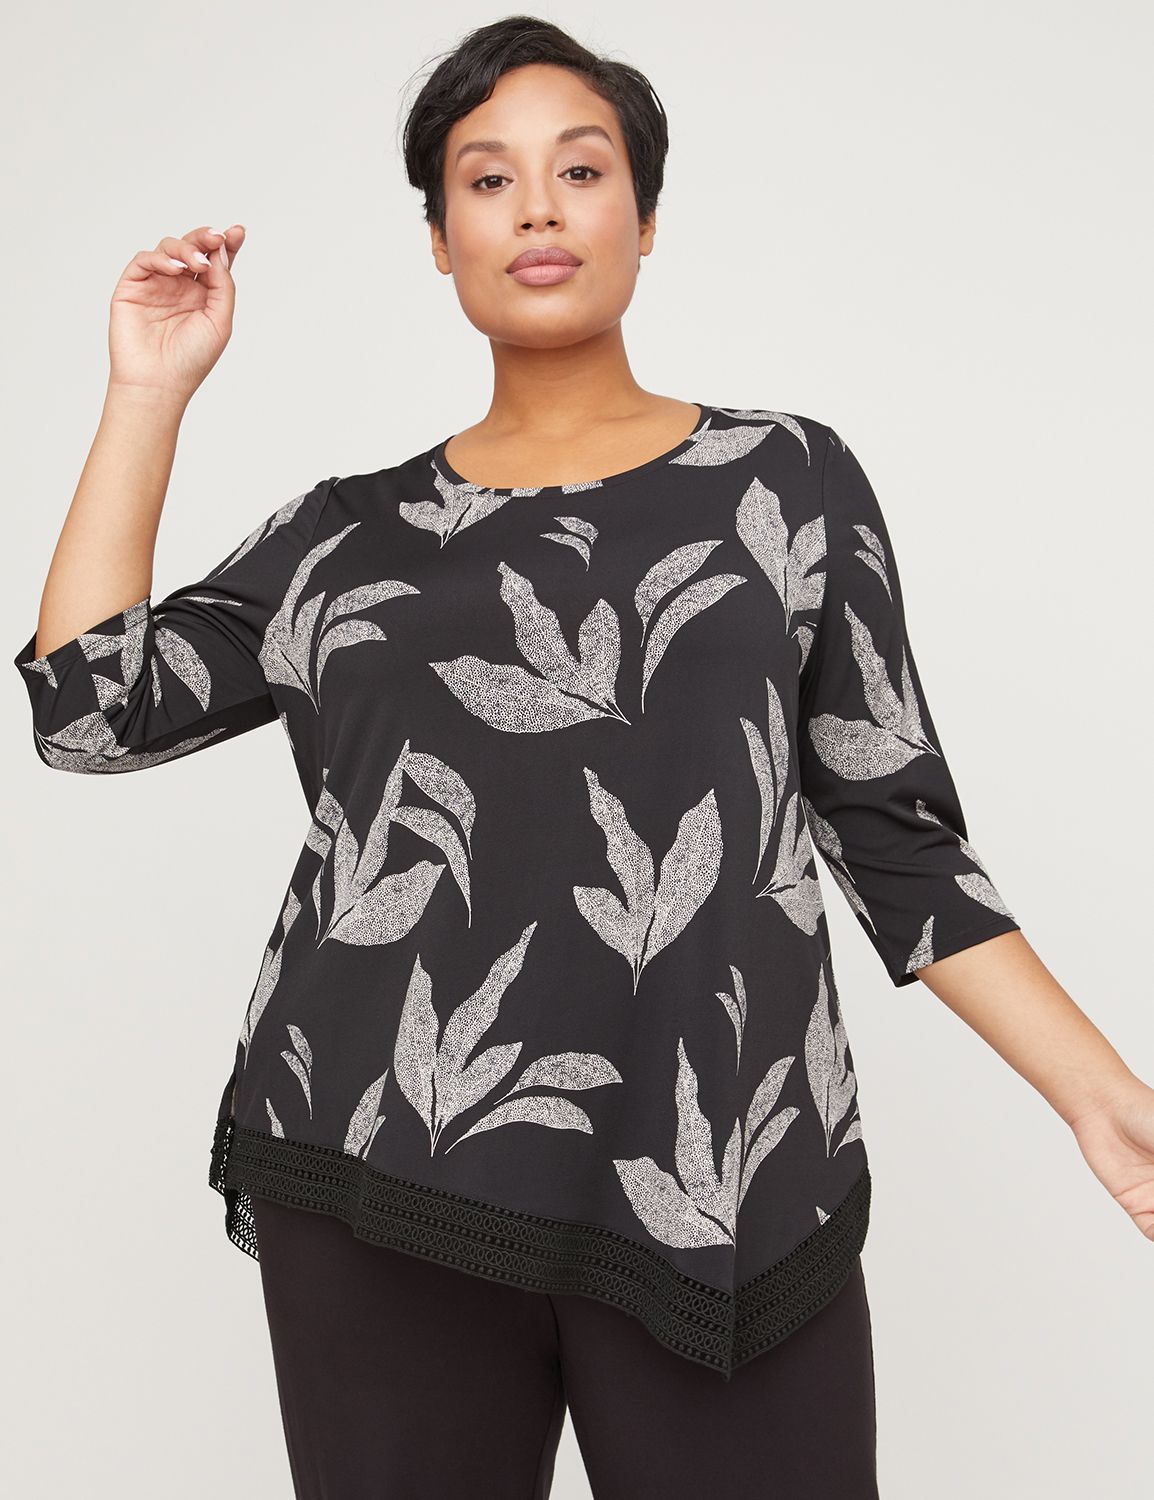 Plus Size Blouses & Shirts | Catherines